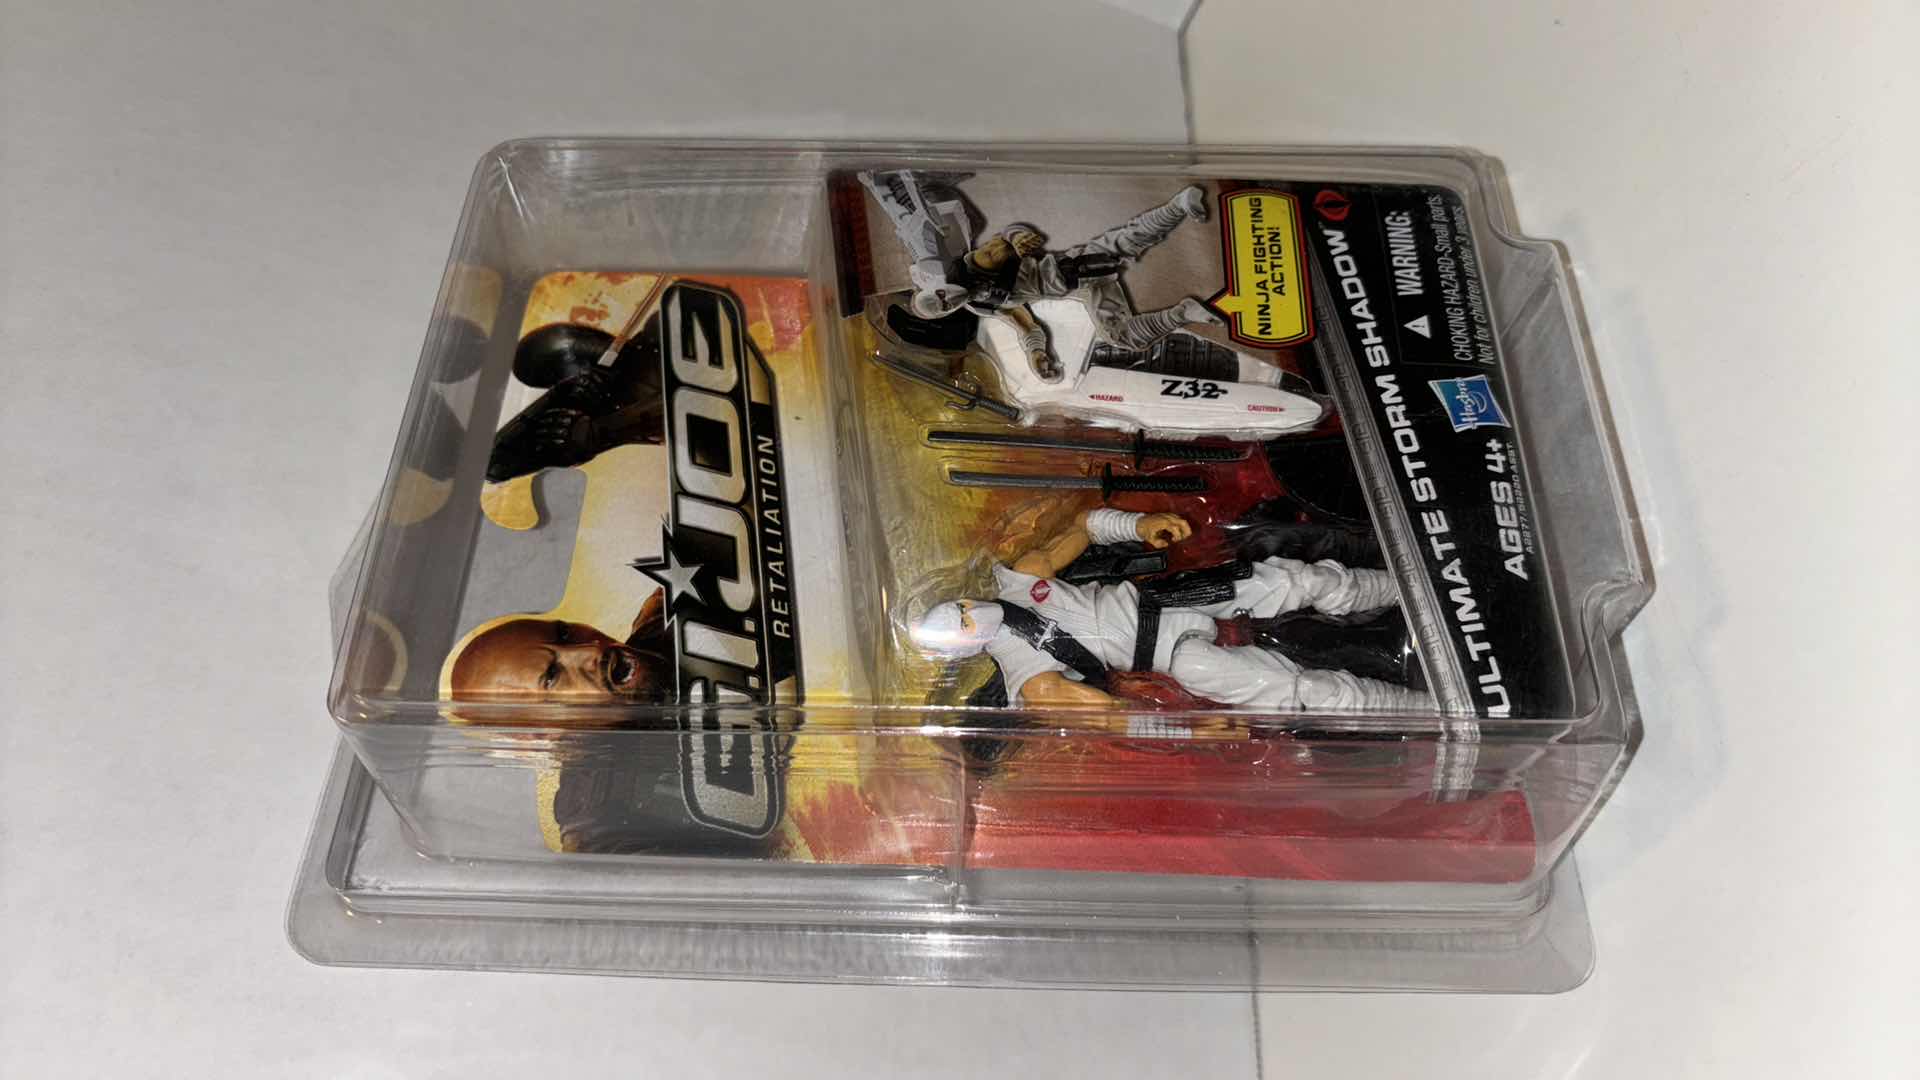 Photo 1 of NEW 2012 HASBRO G.I. JOE RETALIATION ACTION FIGURE & ACCESSORIES “ULTIMATE STORM SHADOW” IN PROTECTIVE CLEAR CLAMSHELL CASE